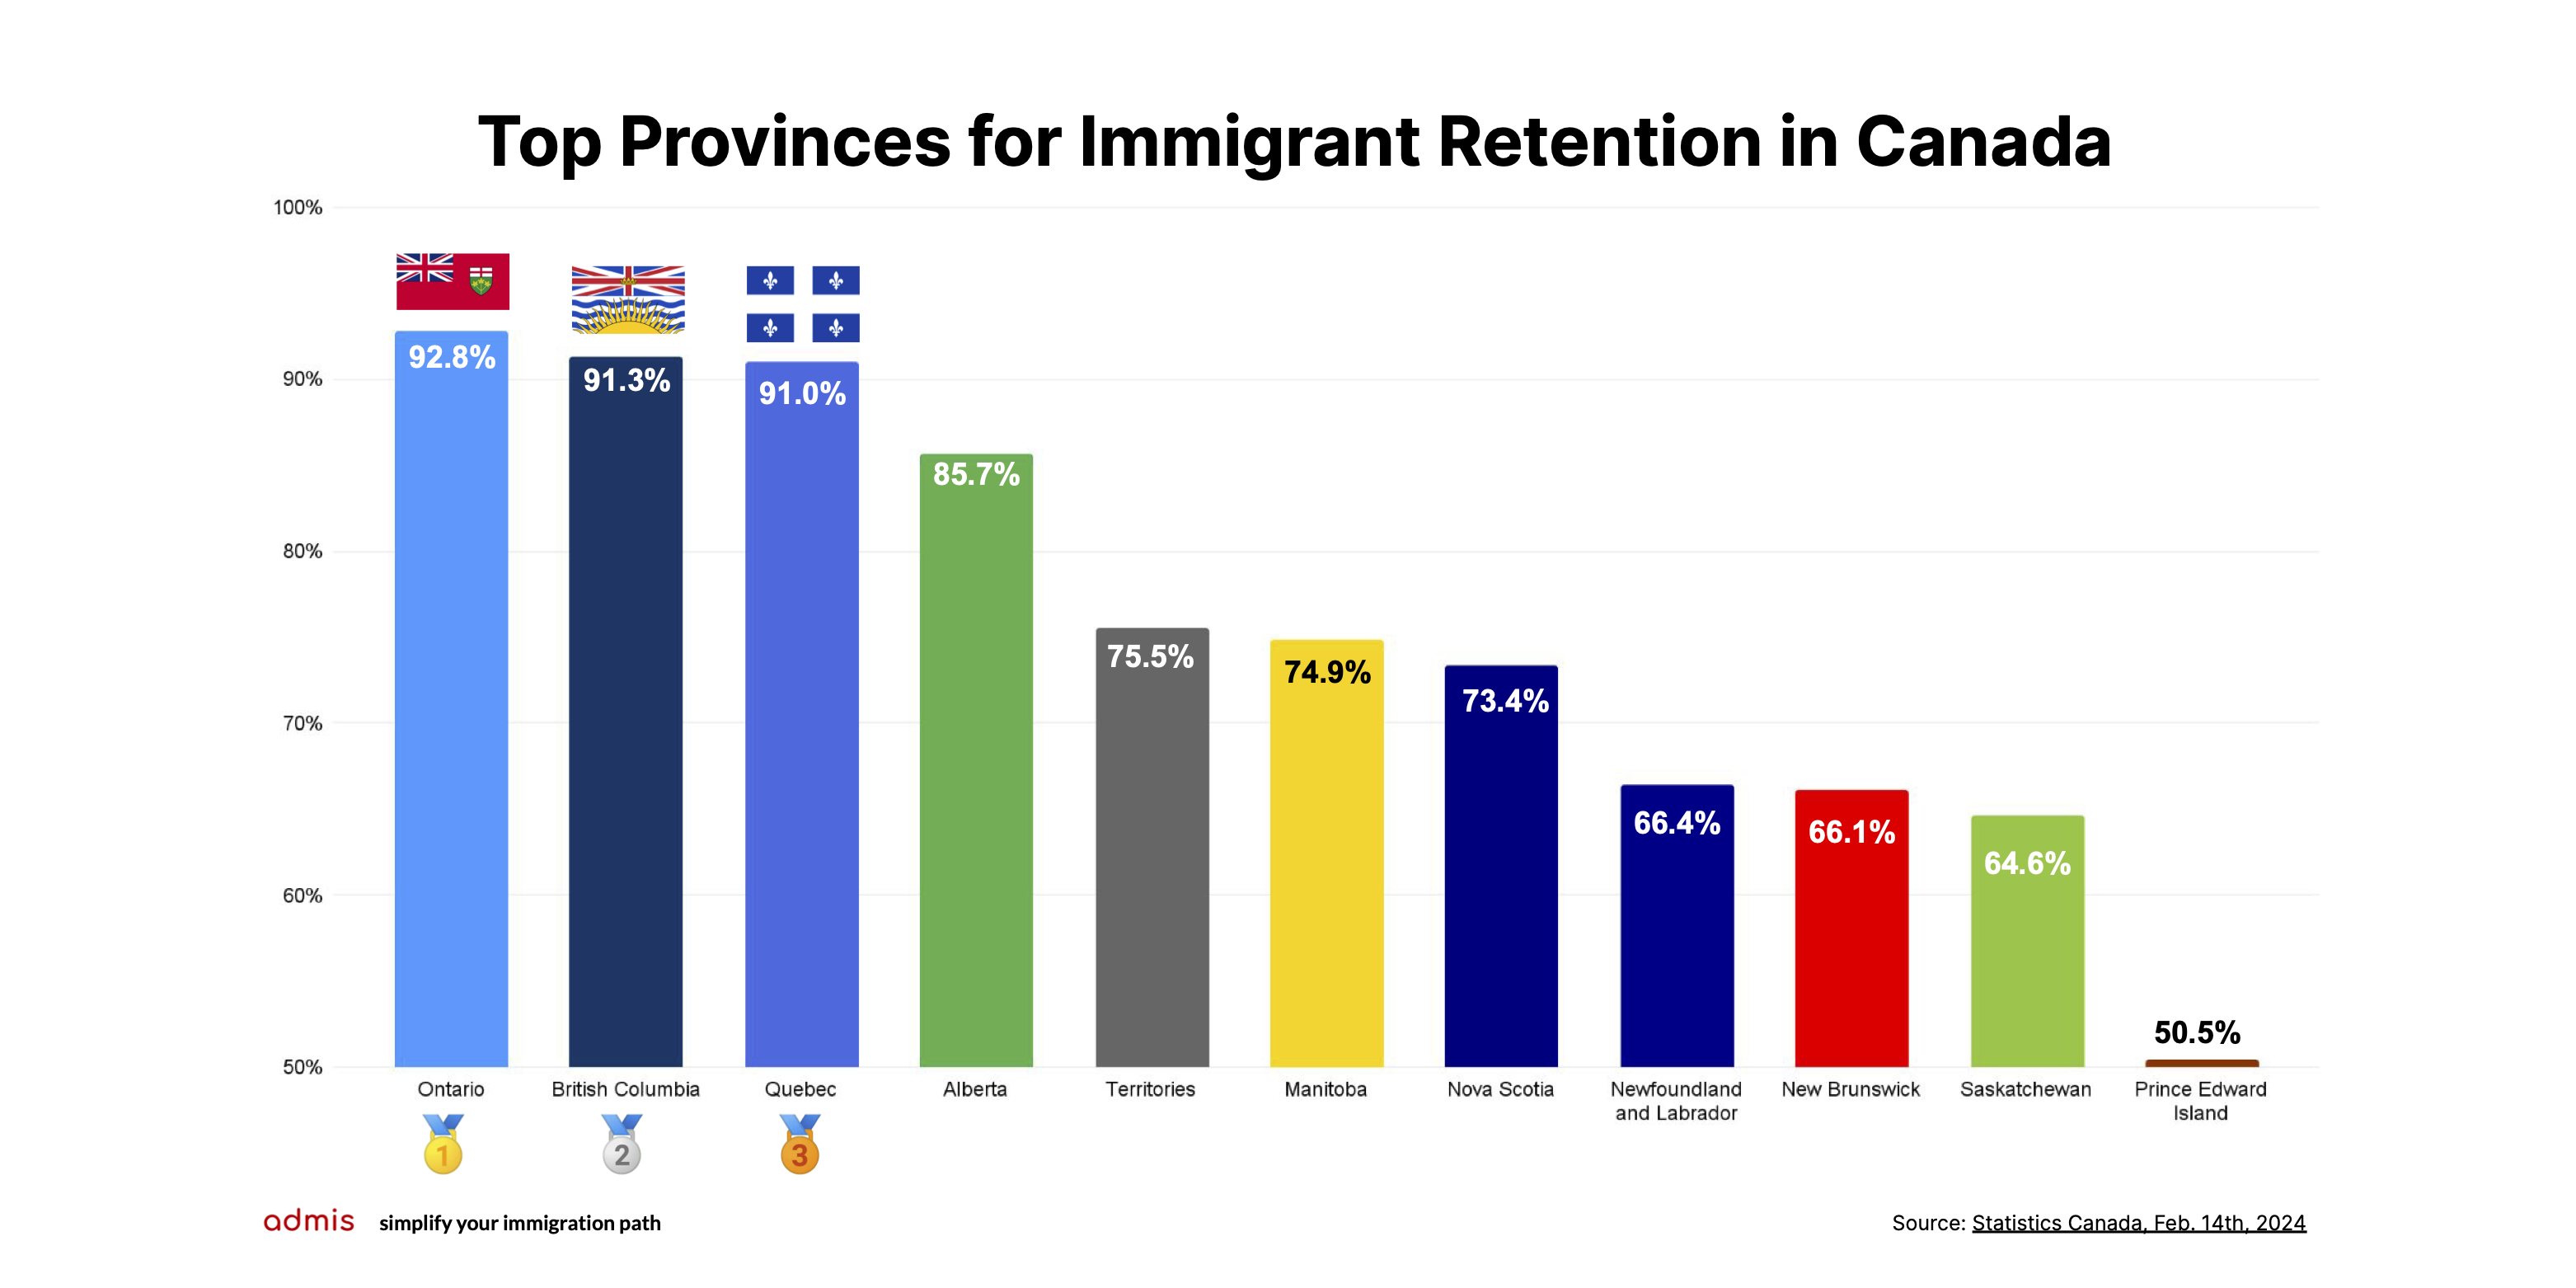 Top Provinces for Immigrant Retention in Canada